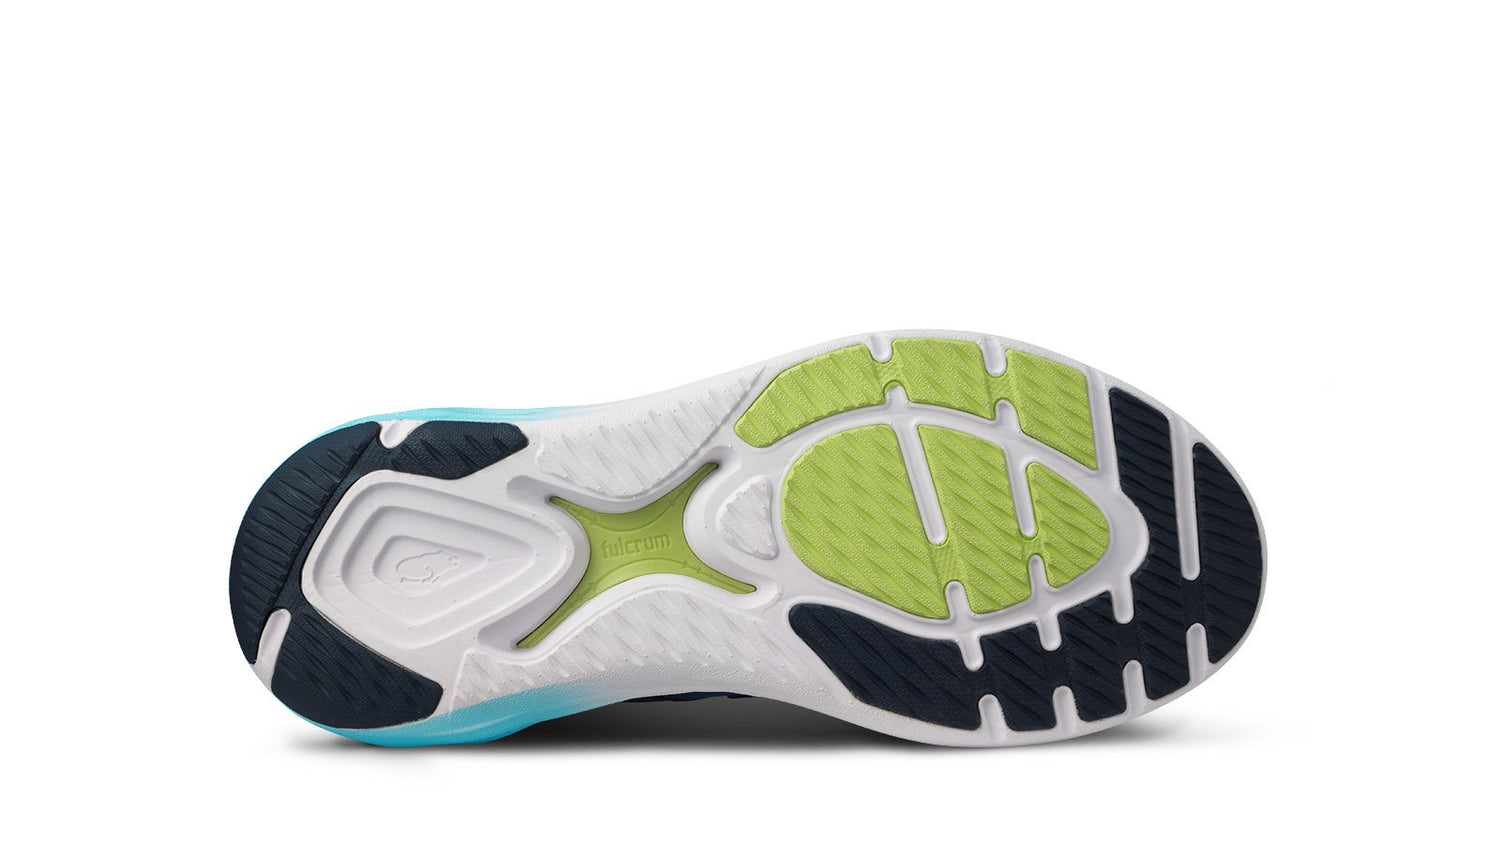 Men's KARHU Ikoni 2.0 outsole with propulsion plate